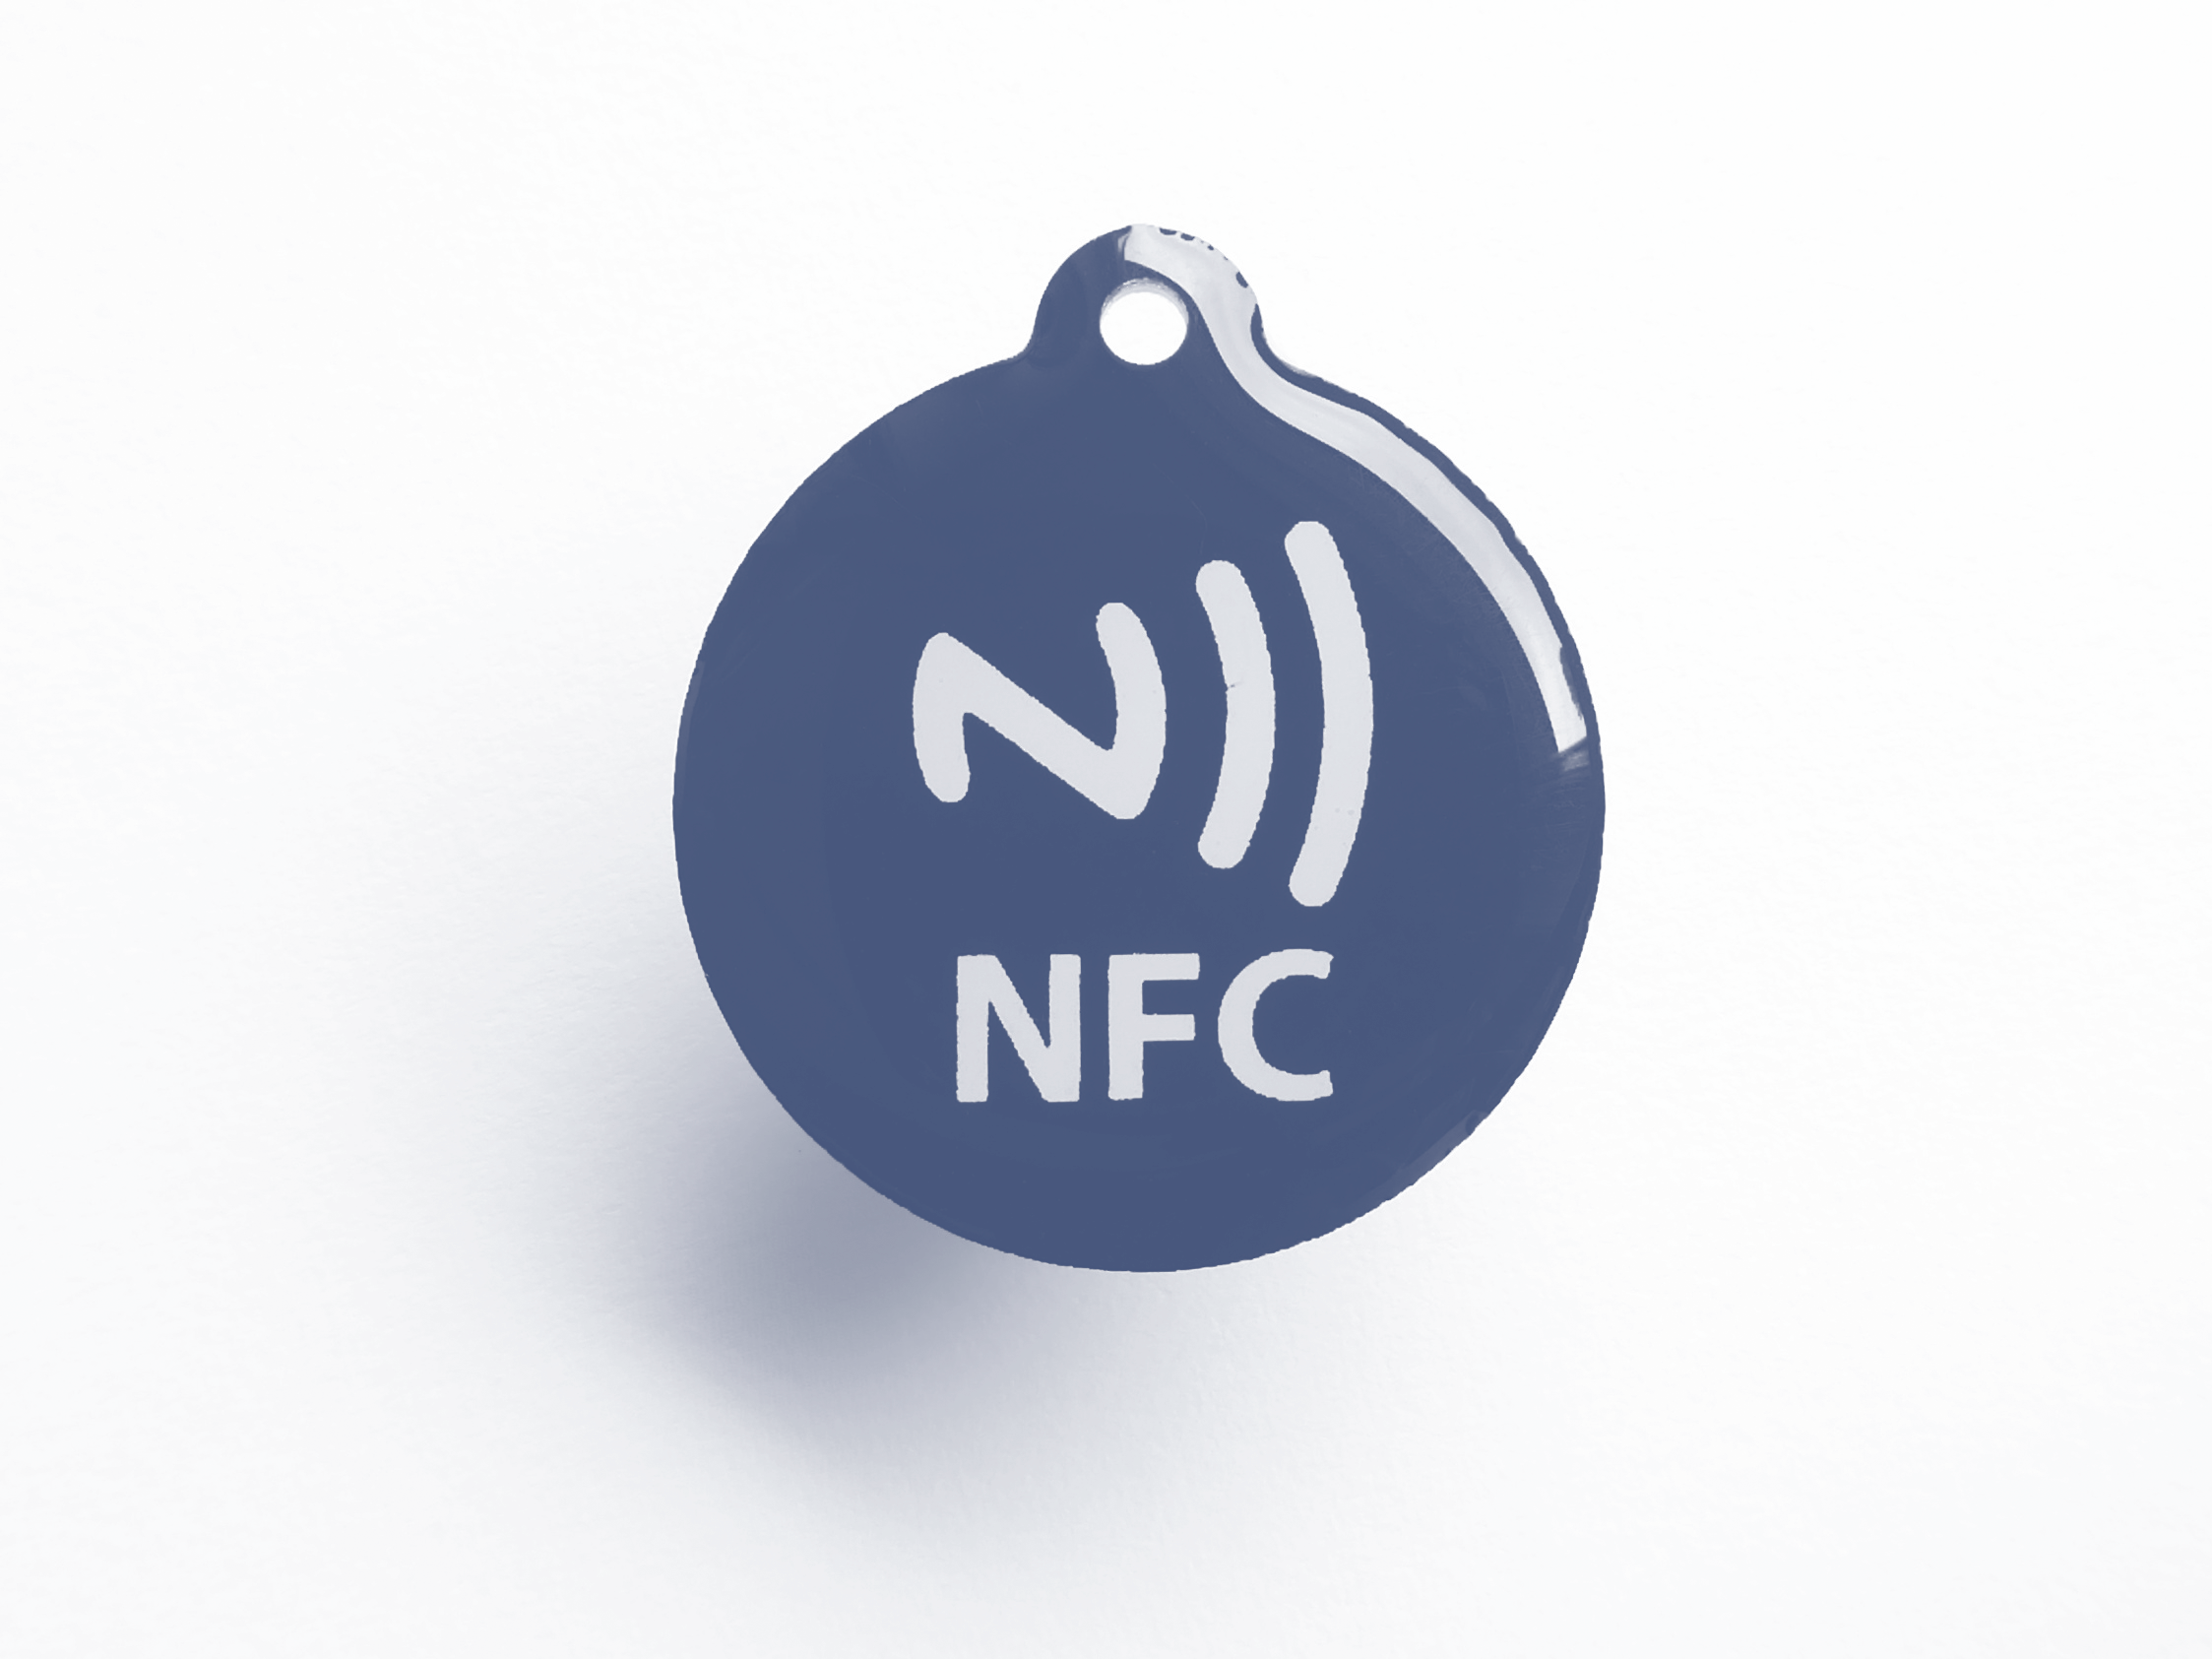 What's the best NFC tag for proof of presence? SIRV reporting and tracking software.